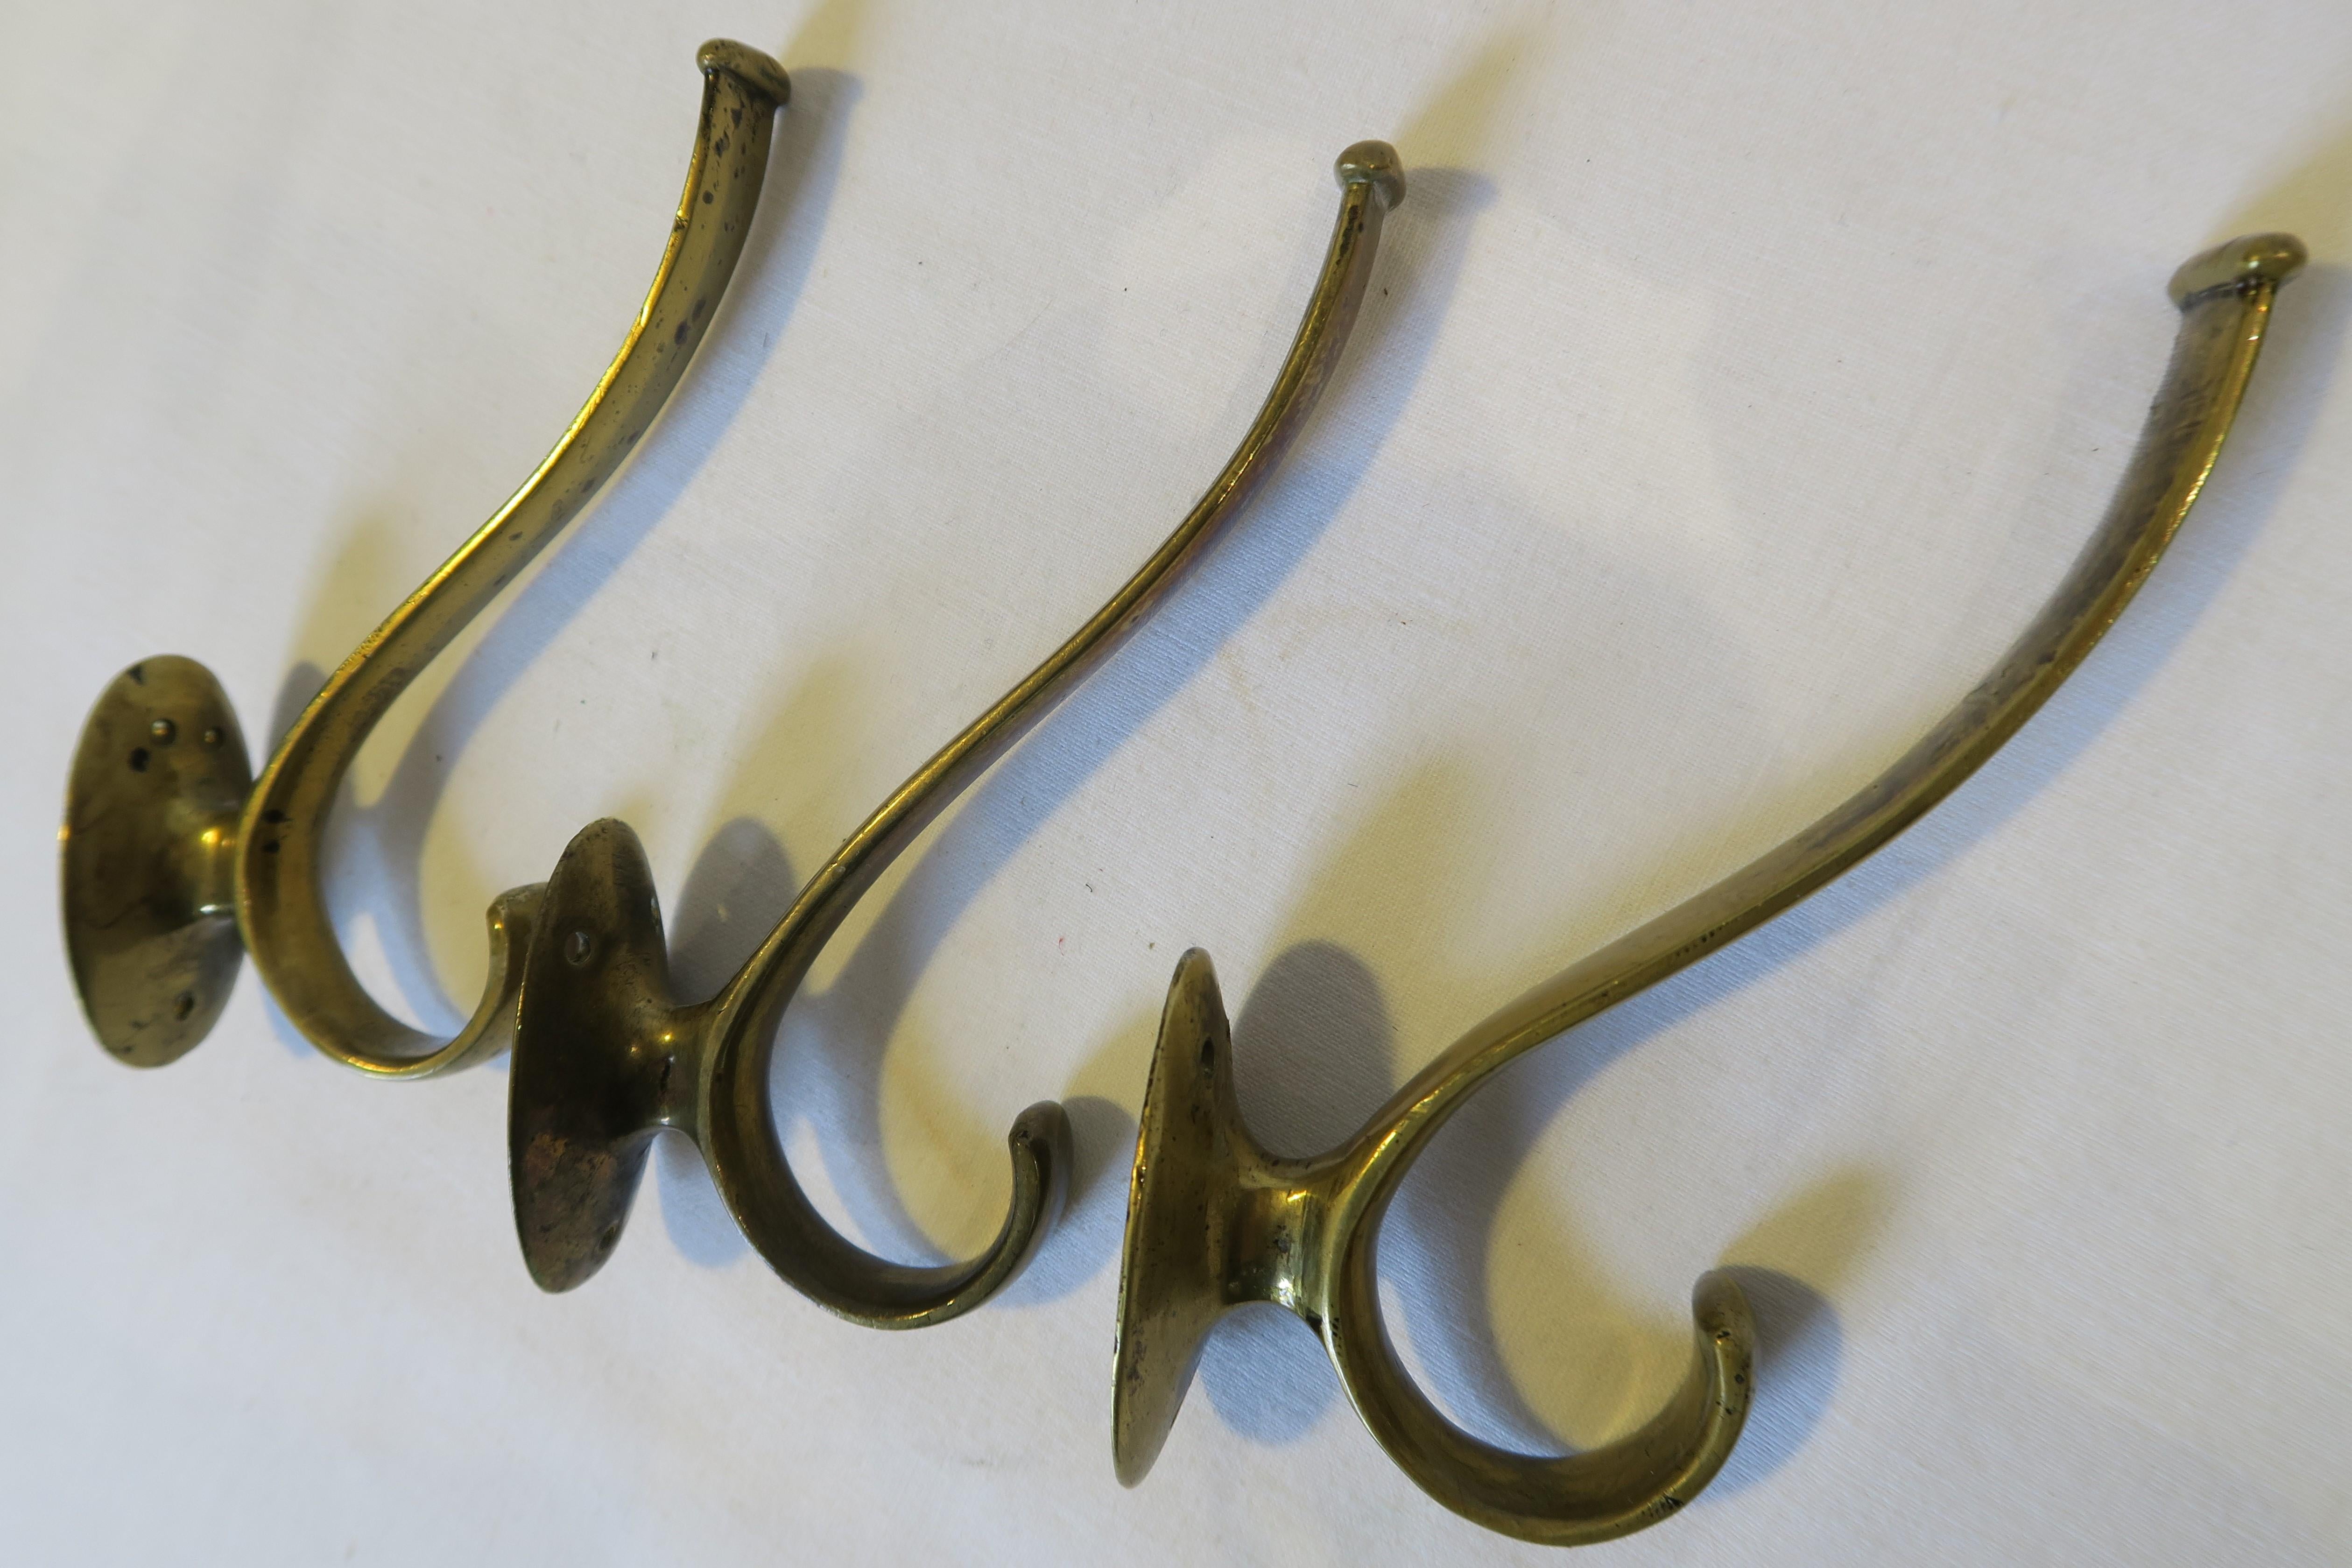 For sale is a beautiful set consisting of three wall mountable Art Nouveau coat hooks. The items were hand-crafted from brass and designed by the renowned Wiener Werkstätte in Austria. They are examples of the typical style of the 20s and 30s and